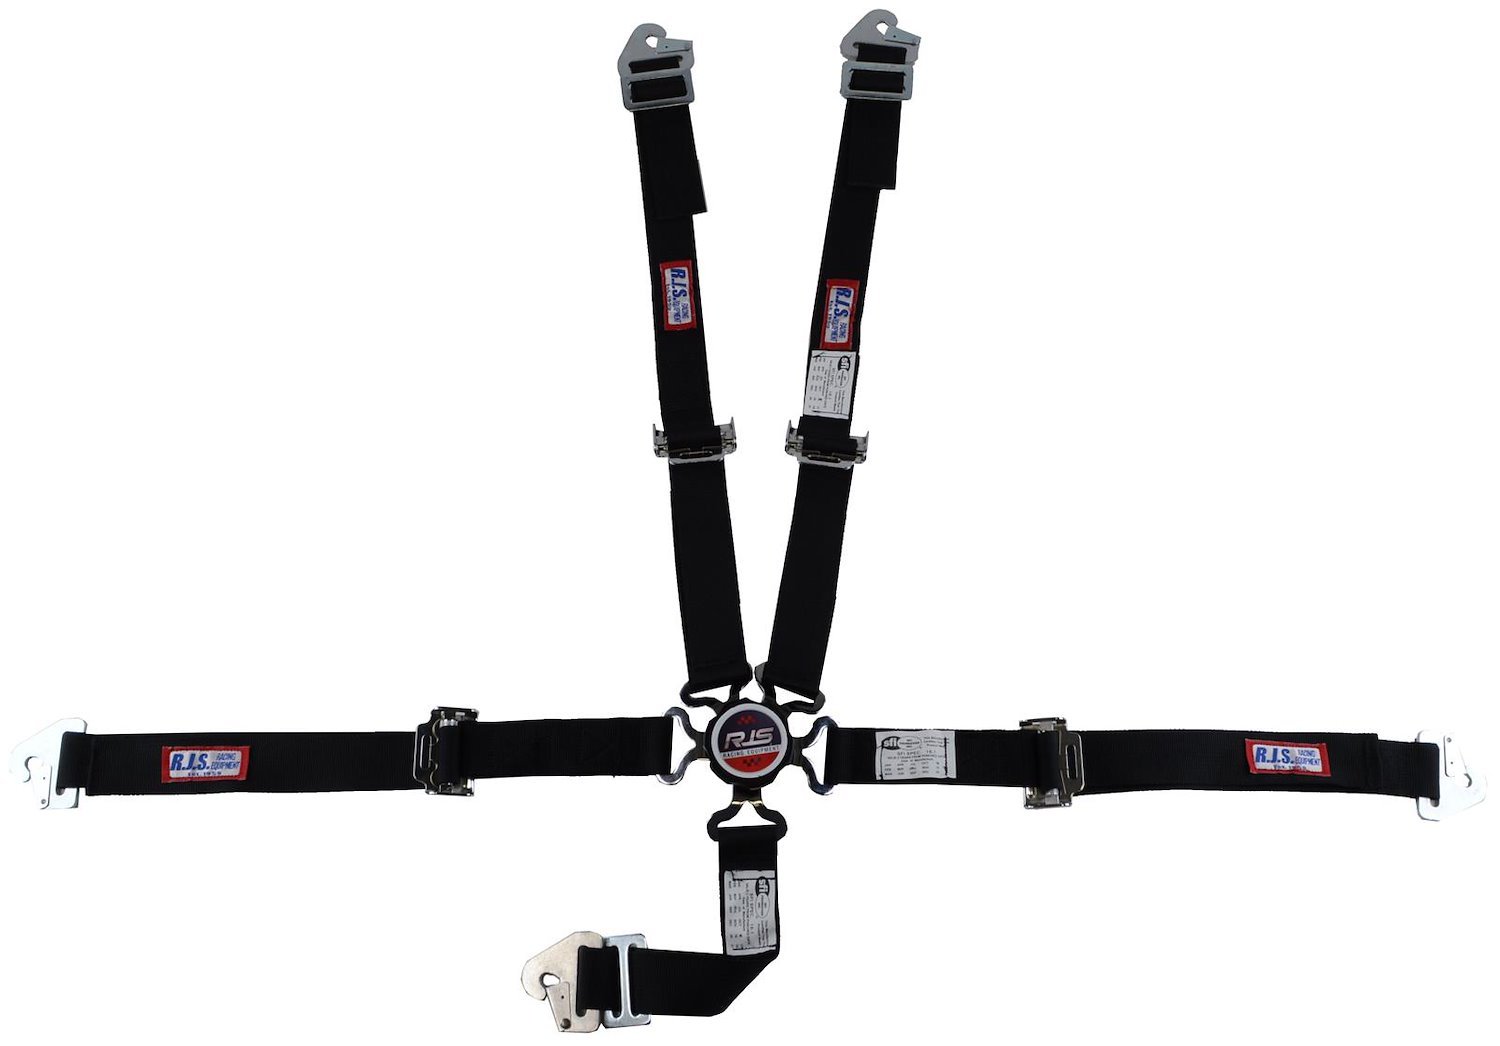 SFI 16.1 CAM-LOCK HARNESS 2 PULL UP Lap Belt 2 Shoulder Harness V ROLL BAR Mount 2 DOUBLE Sub ALL SNAP ENDS w/STERNUM STRAP BLUE